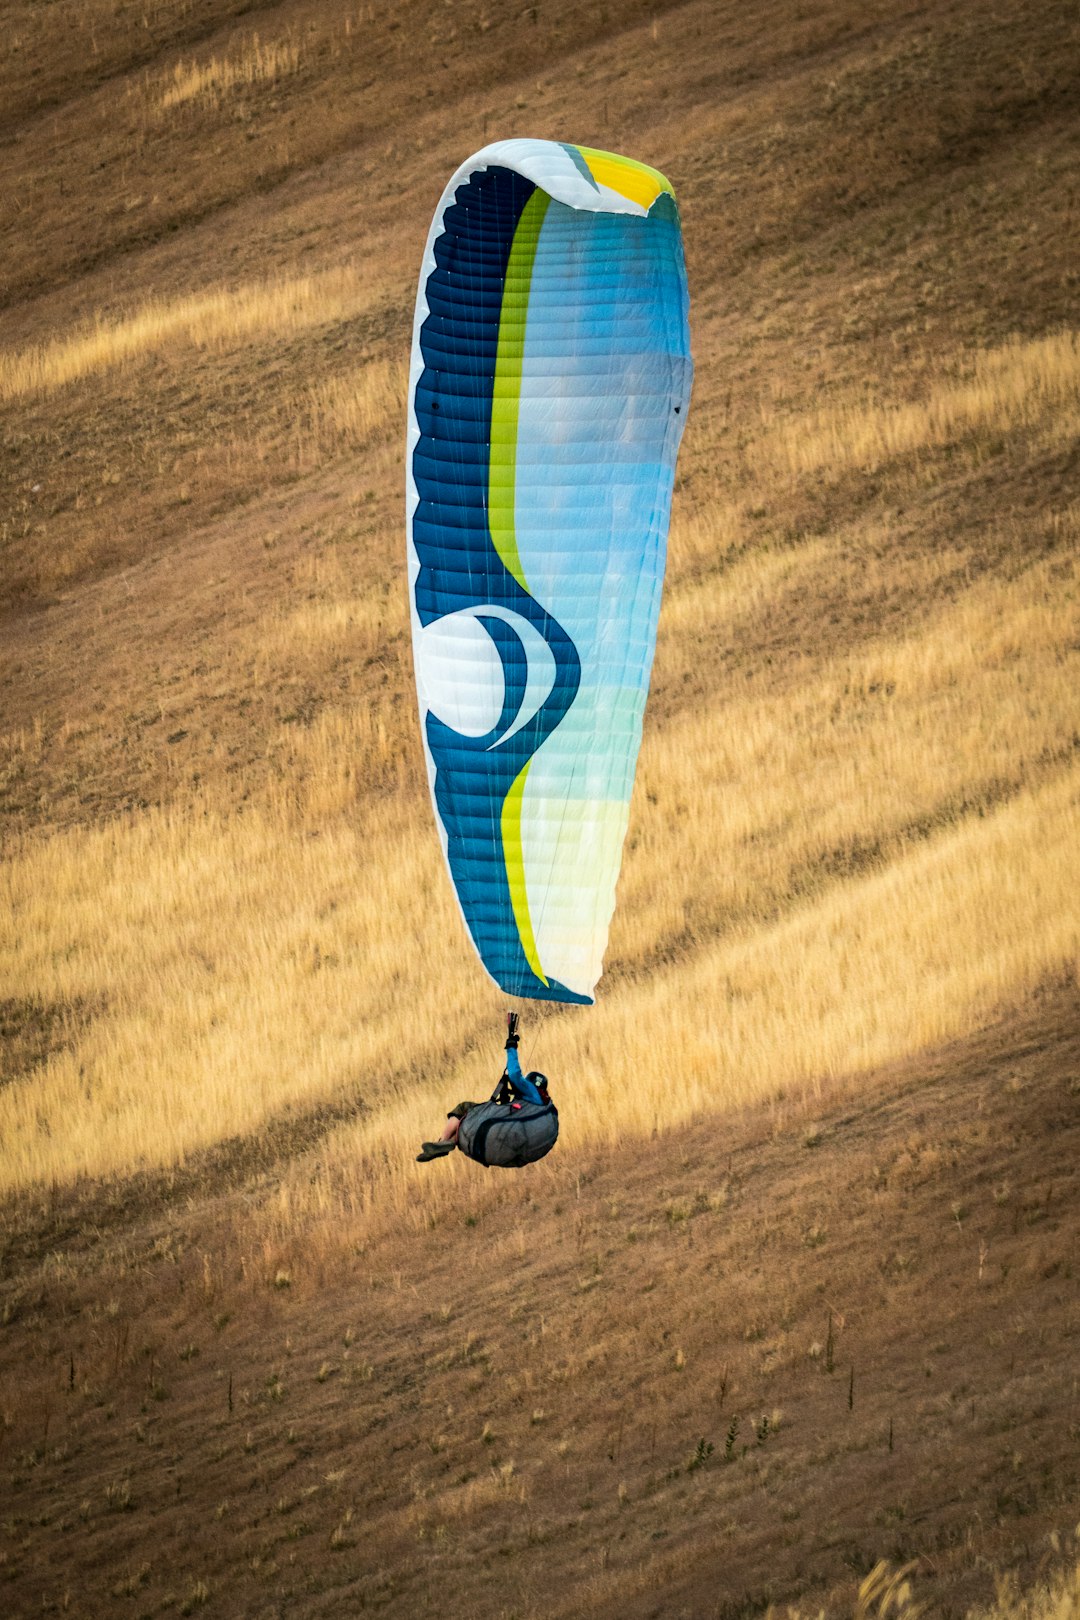 person hanging on white and blue parachute